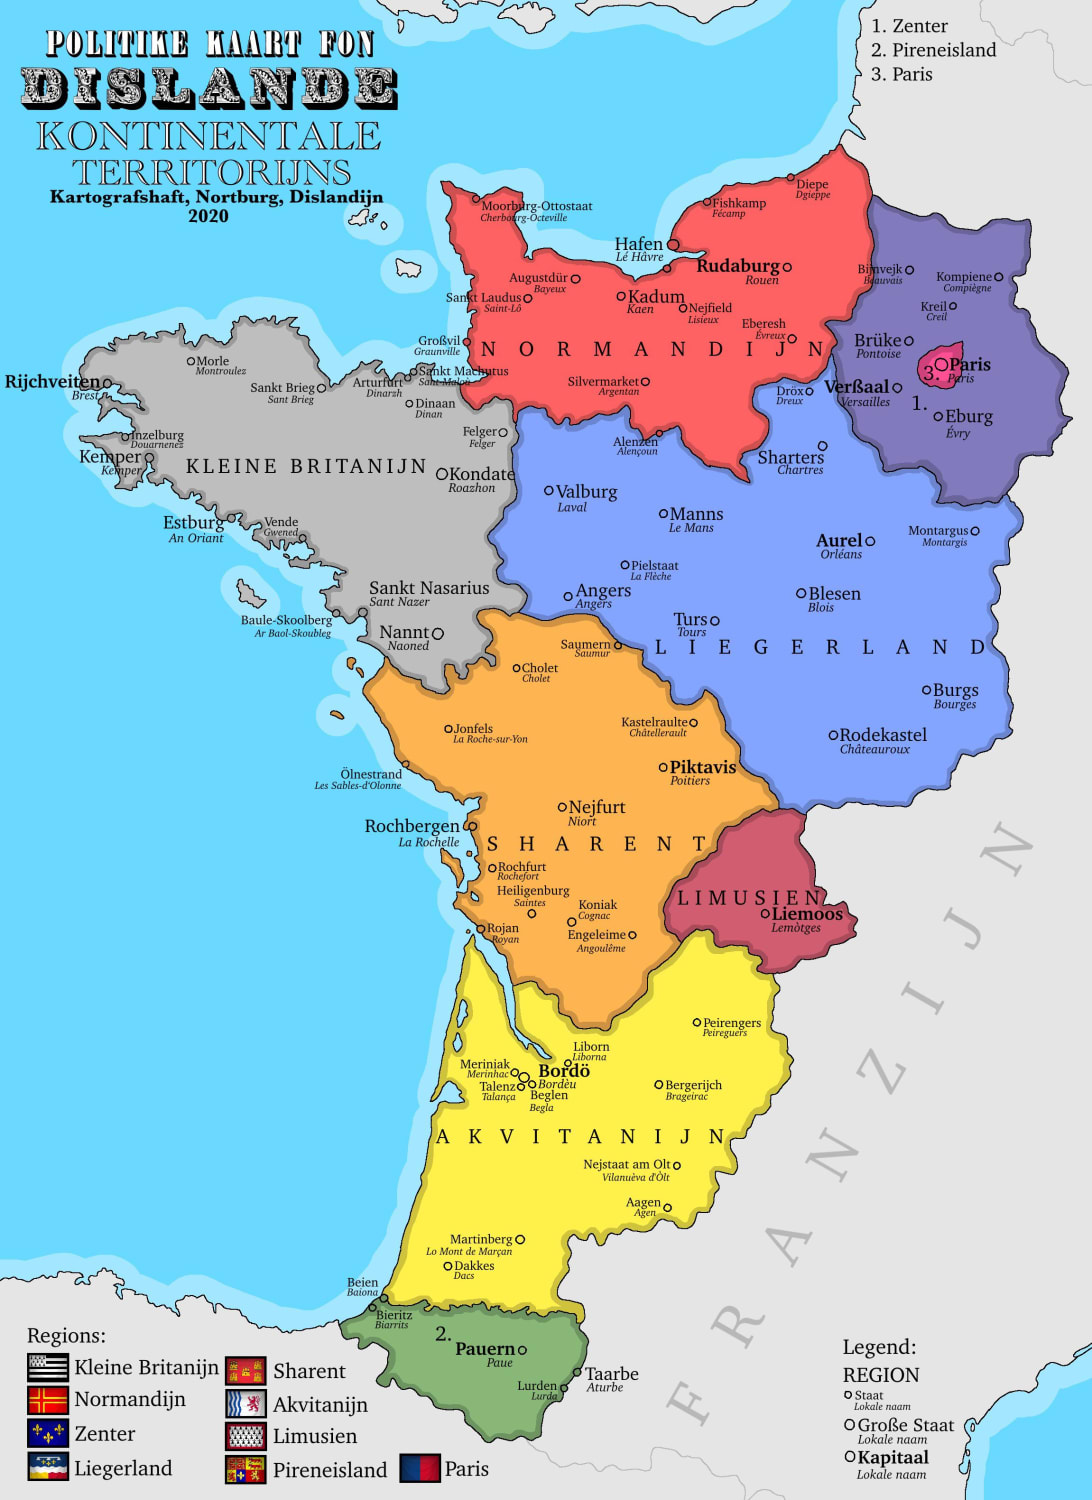 Western France, but this territory is captured by a fictional Germanic country.